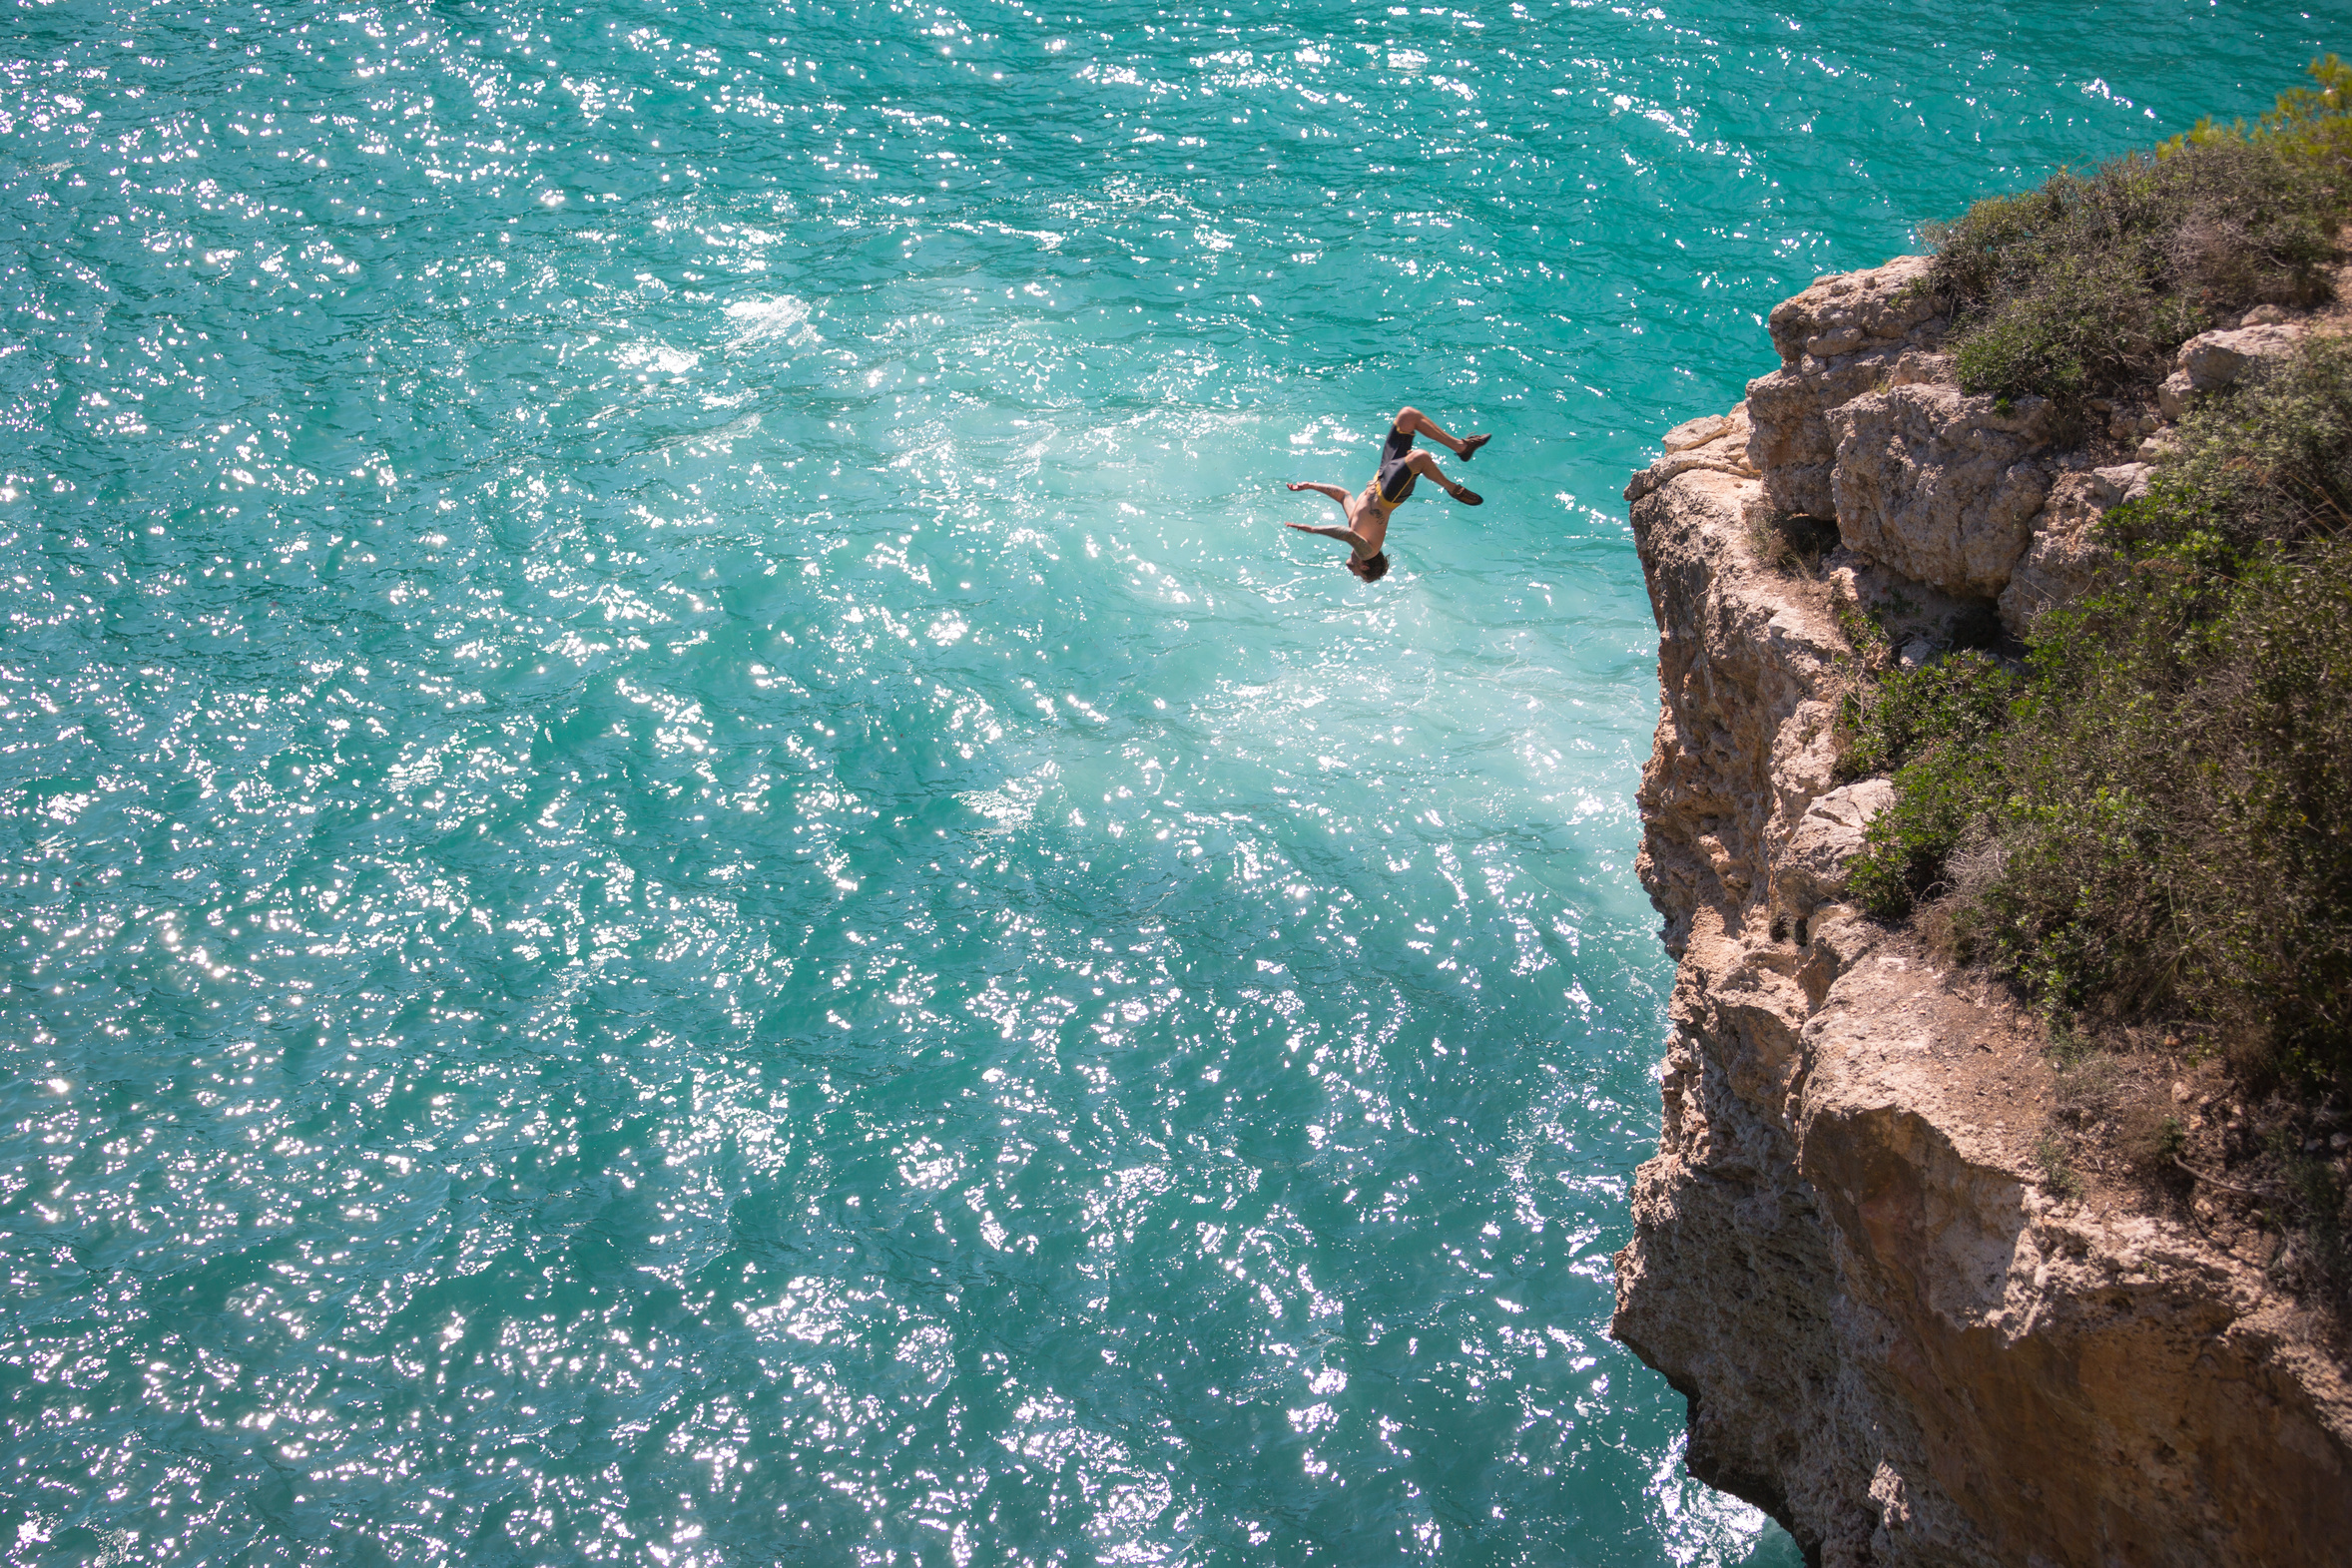 Man jumping upside down from cliff to sea, full frame